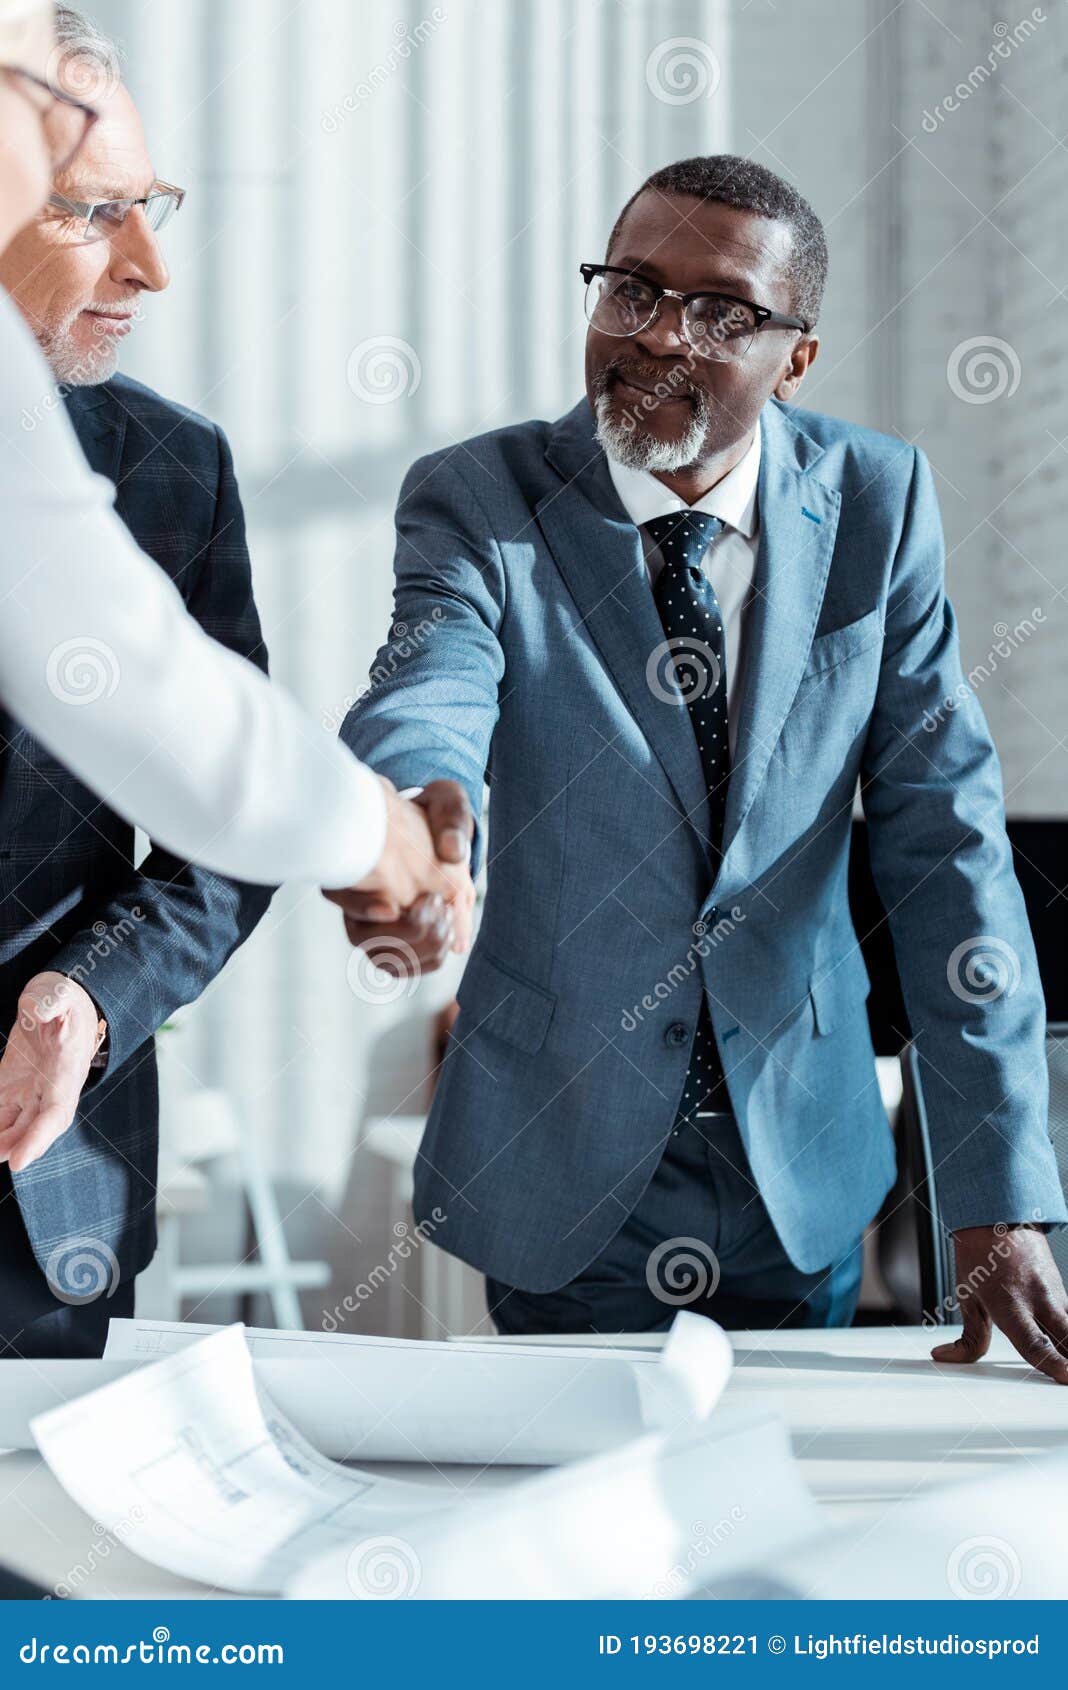 Focus Of Businessman In Glasses Looking At African American Man Shaking Hands With Woman In